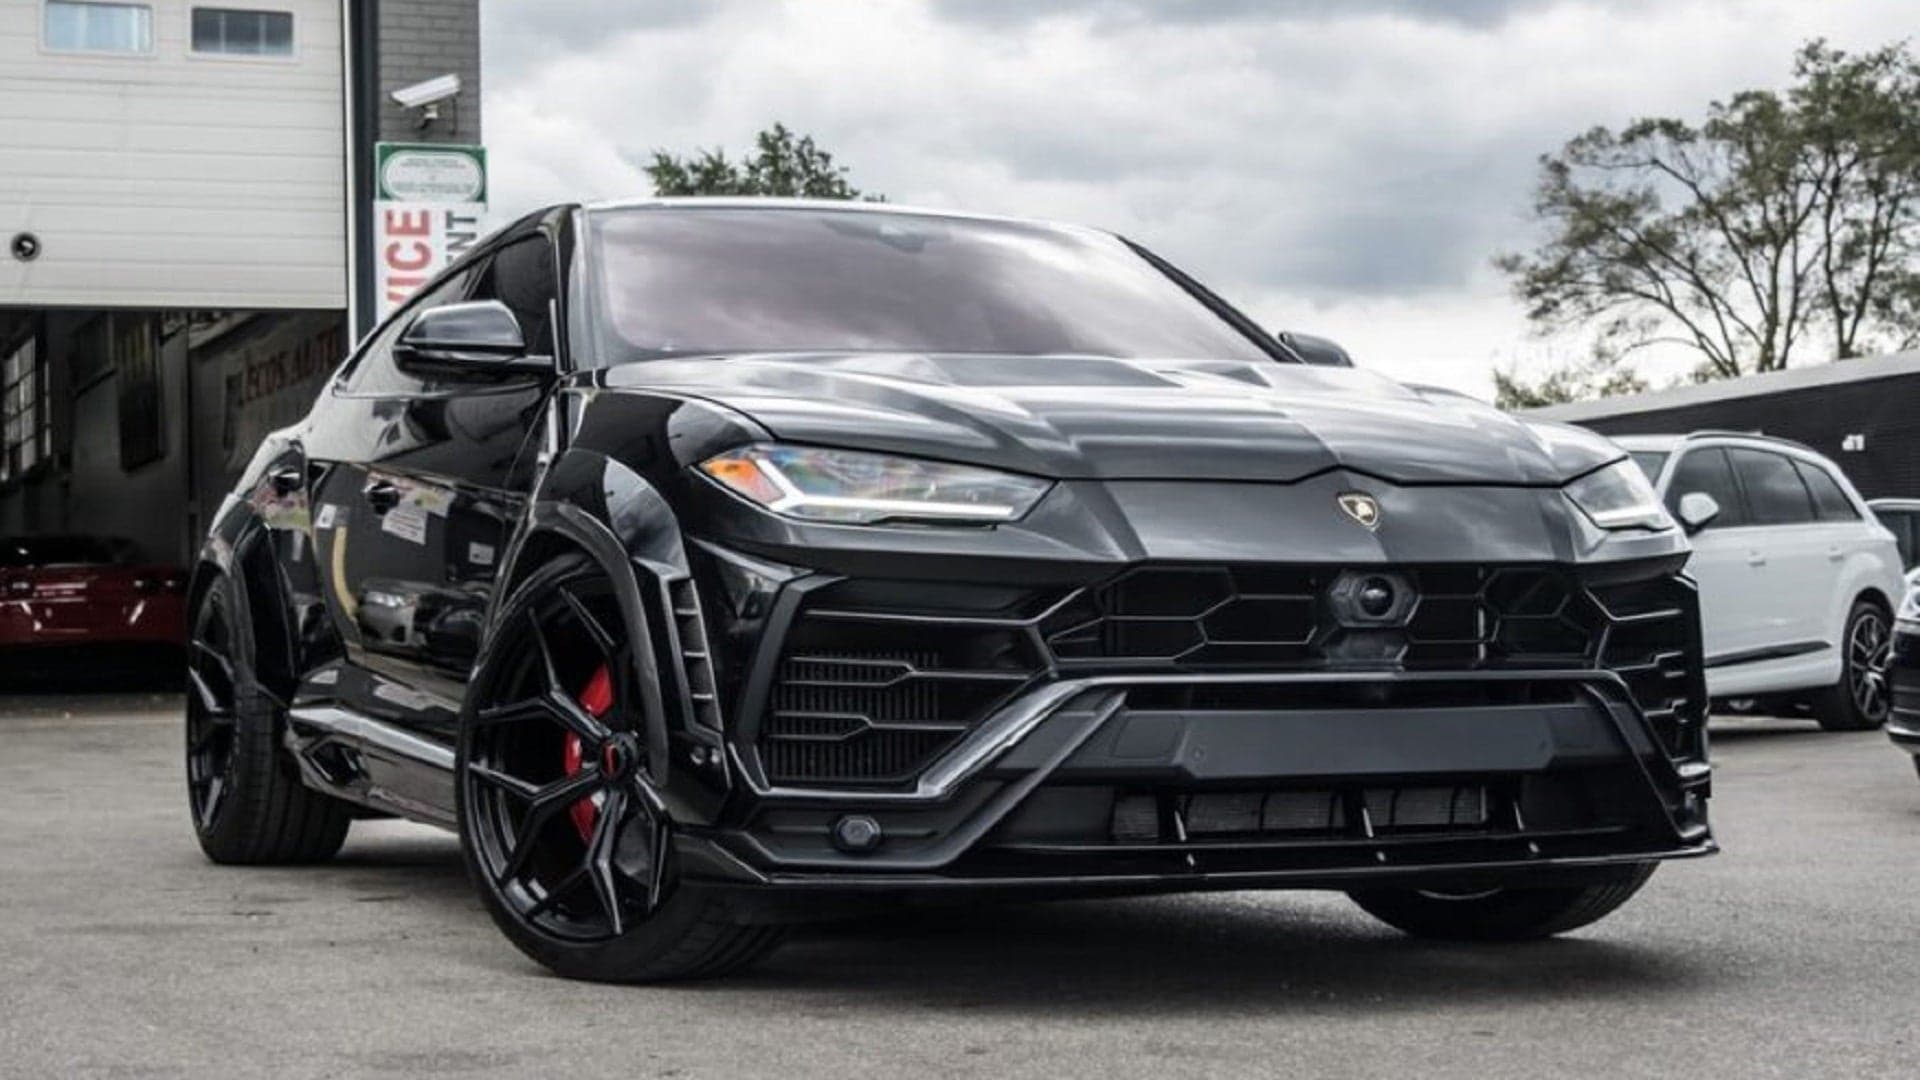 Thieves on the Run After Removing Tracking Device From Rental 2019 Lamborghini Urus